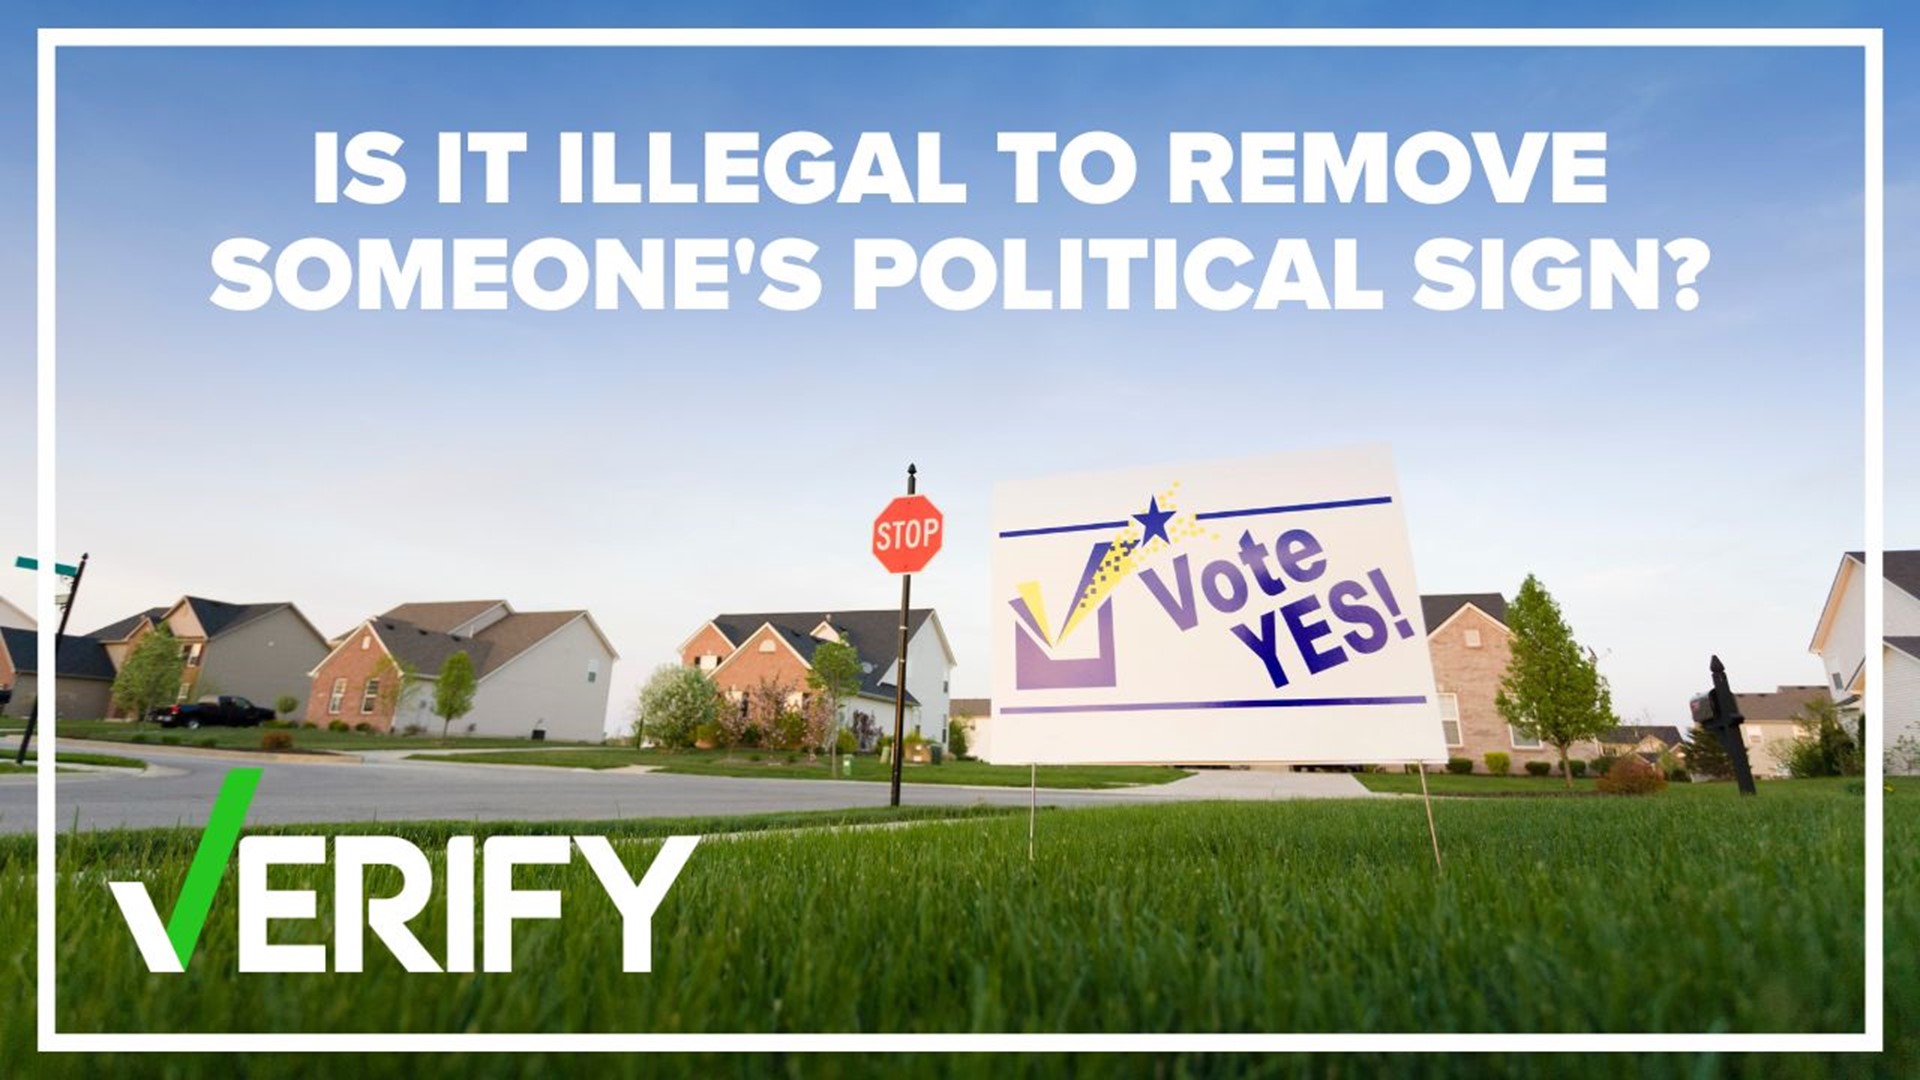 Political lines are drawn and some people may not like the candidate on their neighbor's sign. But it is illegal to take someone else's sign.